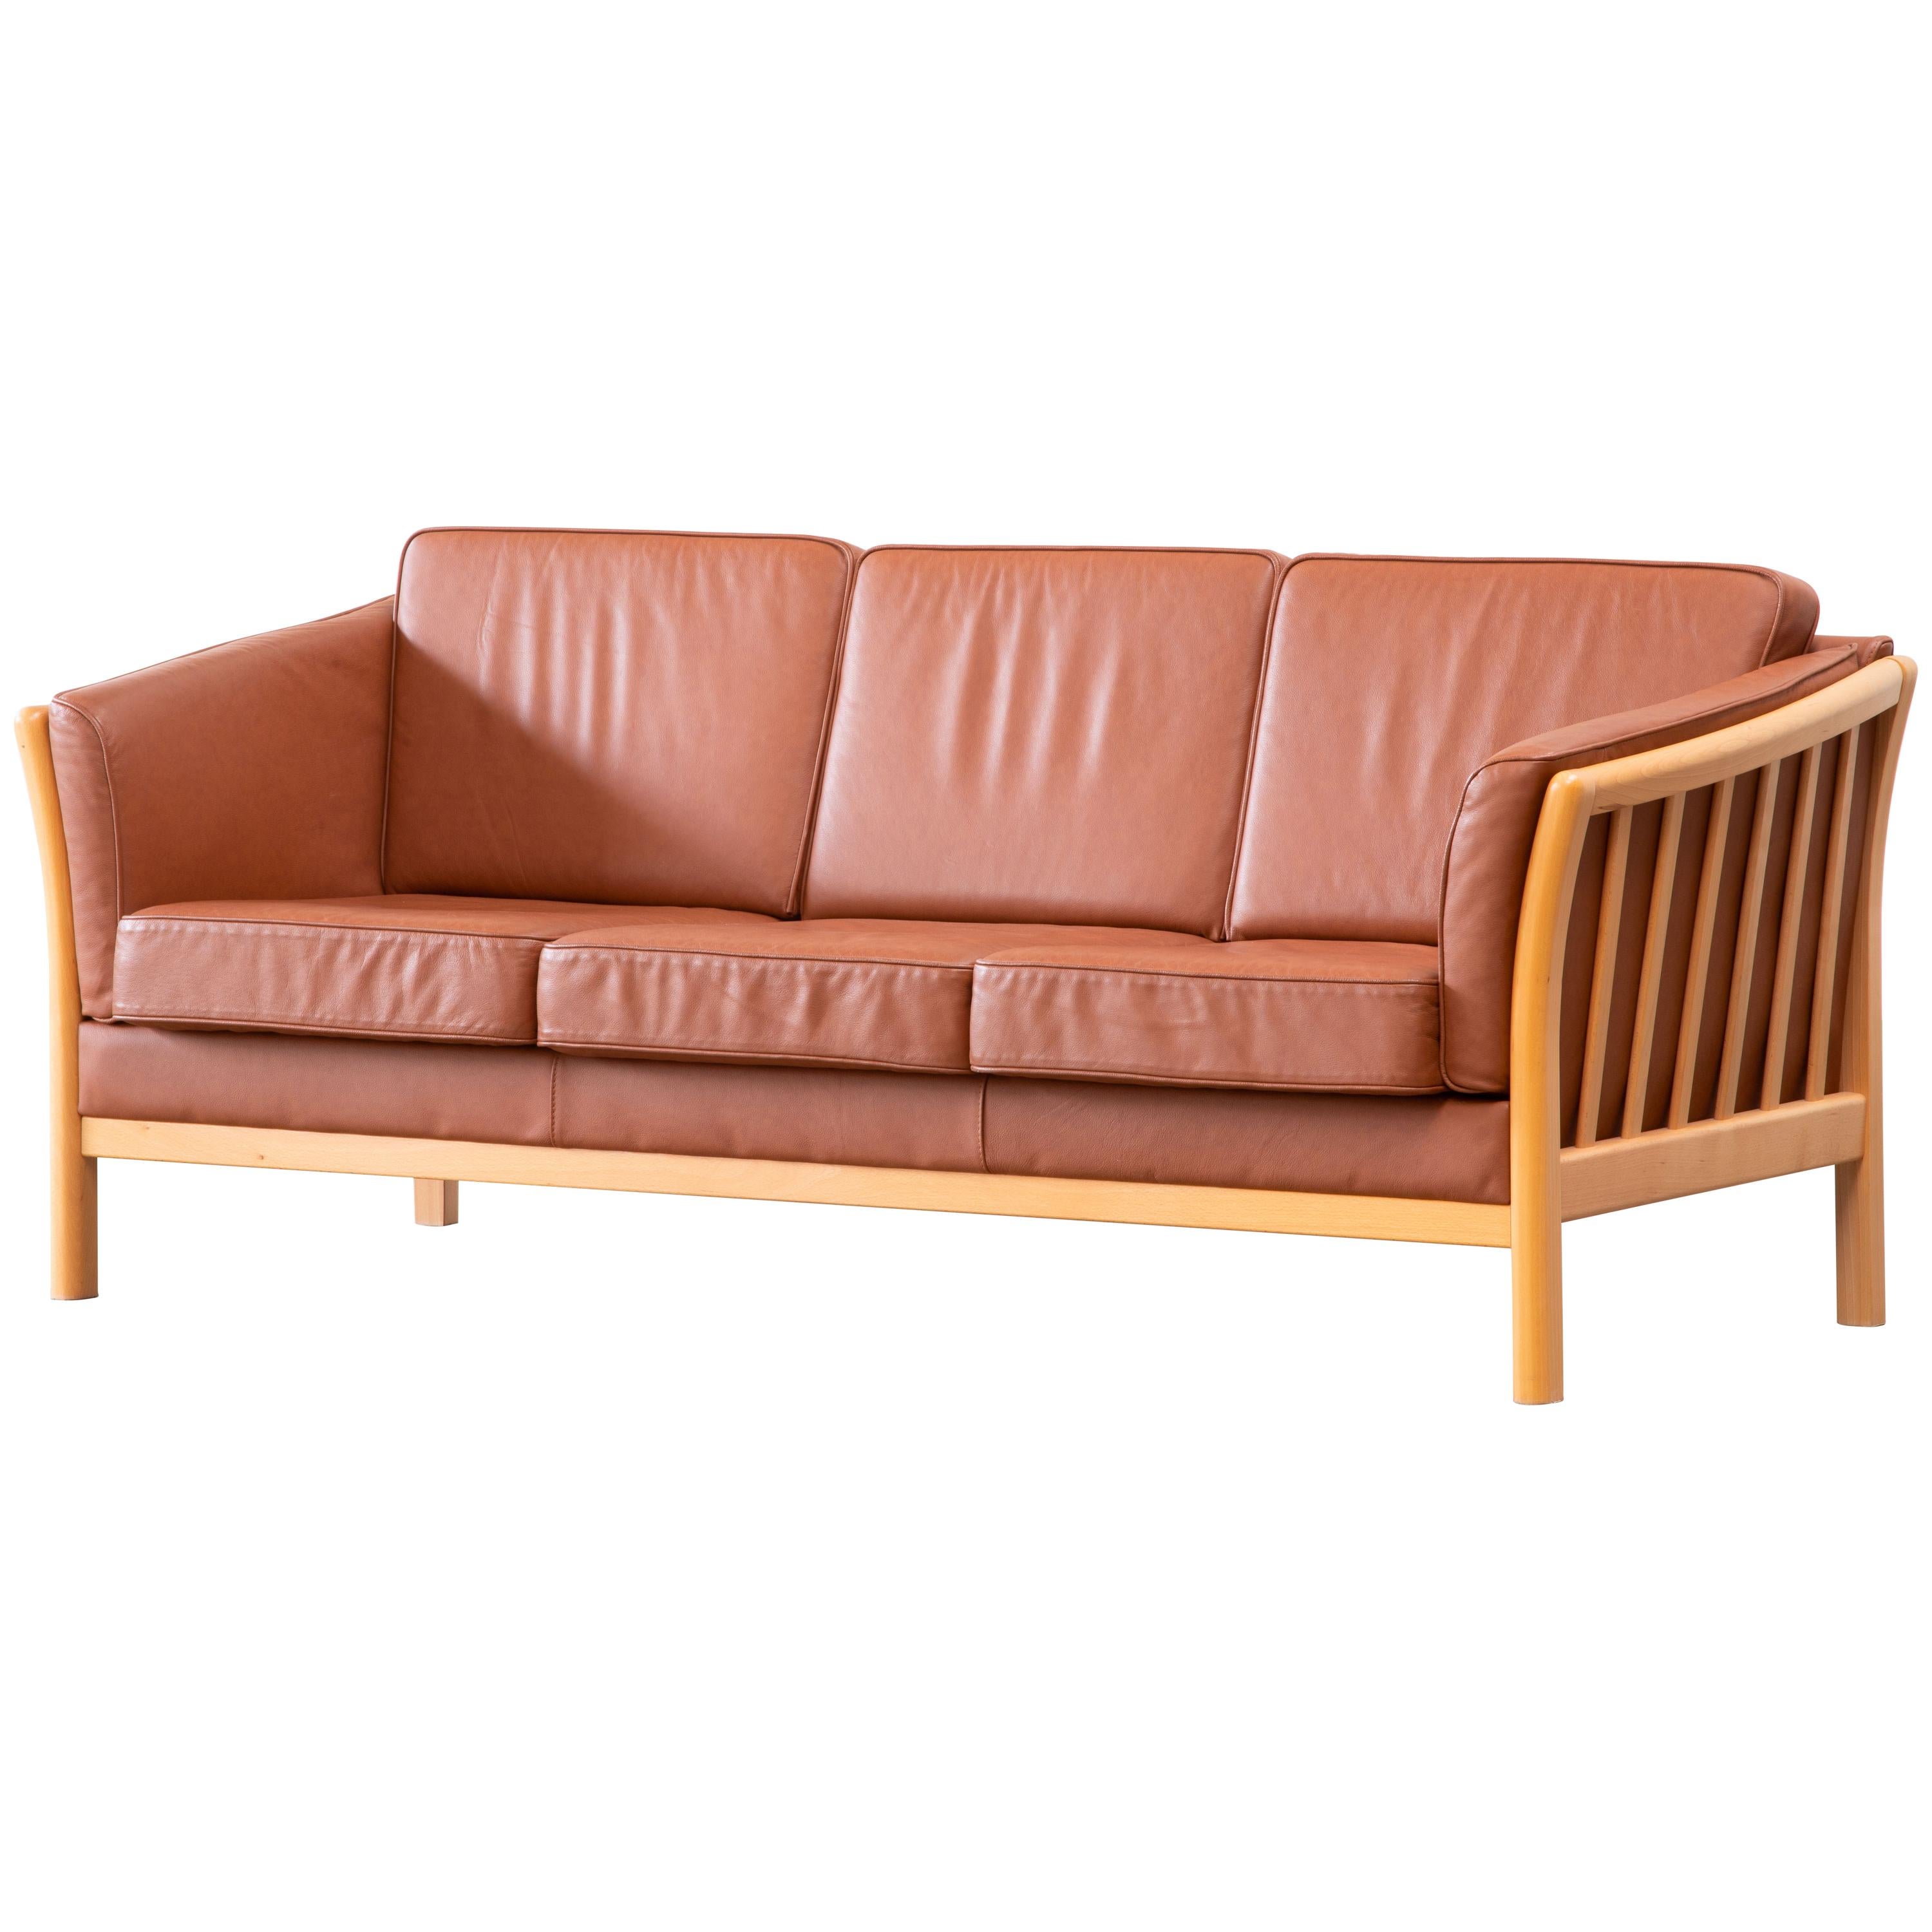 Danish Leather Sofa from the 70's